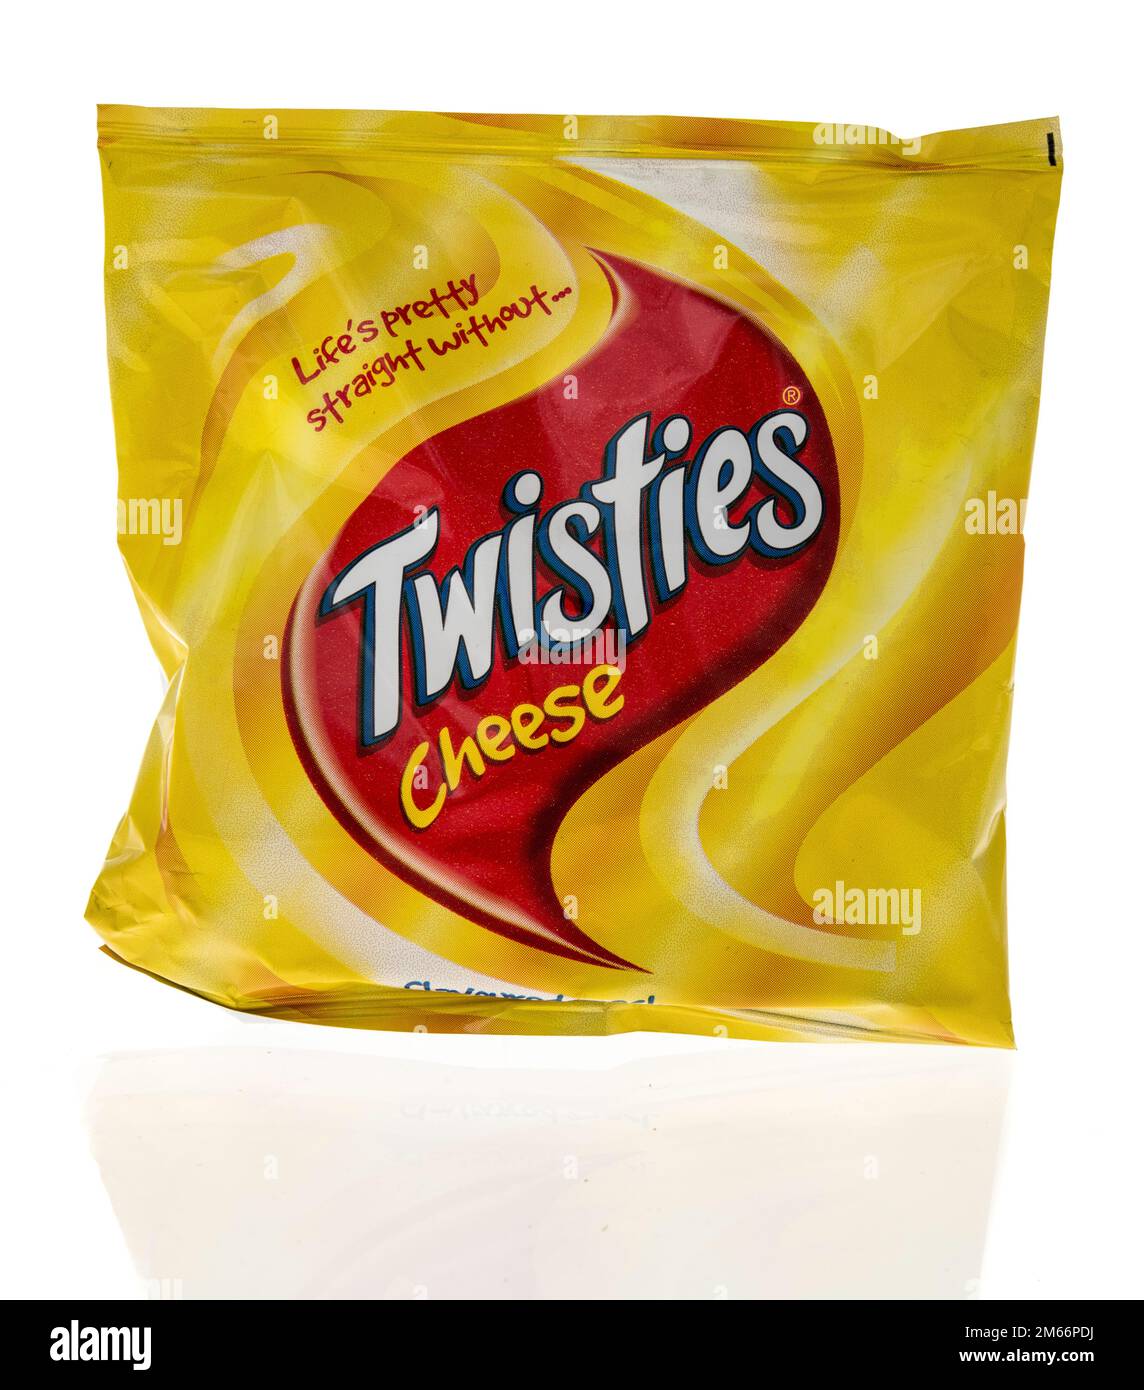 Winneconne, WI - 5 December 2022: A package of Twisties cheese on an isolated background. Stock Photo